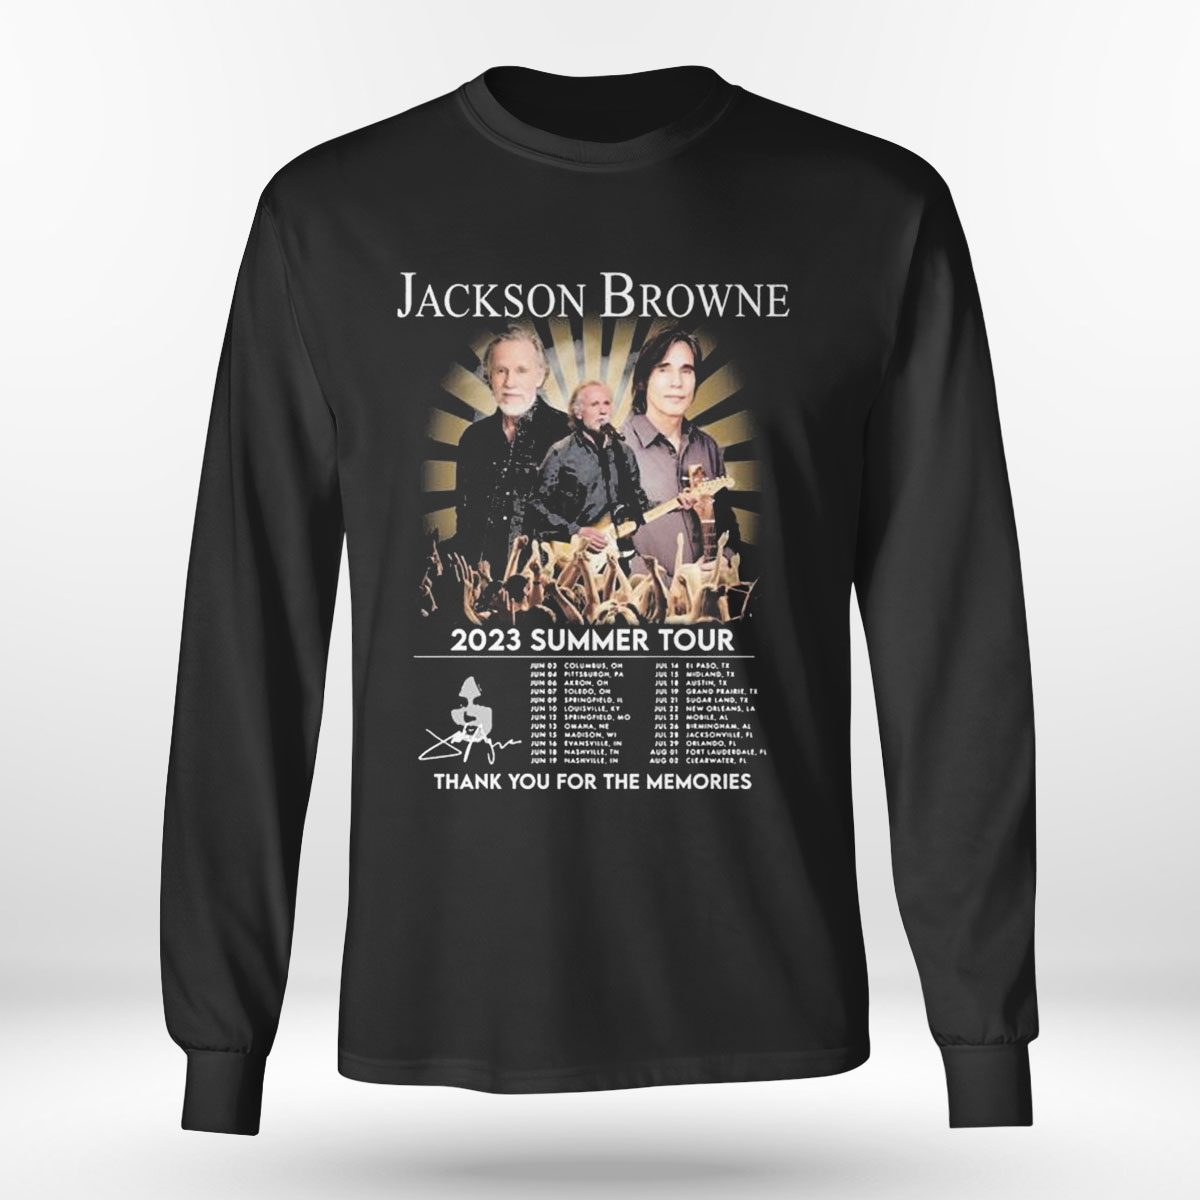 Jackson Browne 2023 Summer Tour Thank You For The Memories Signatures T-shirt